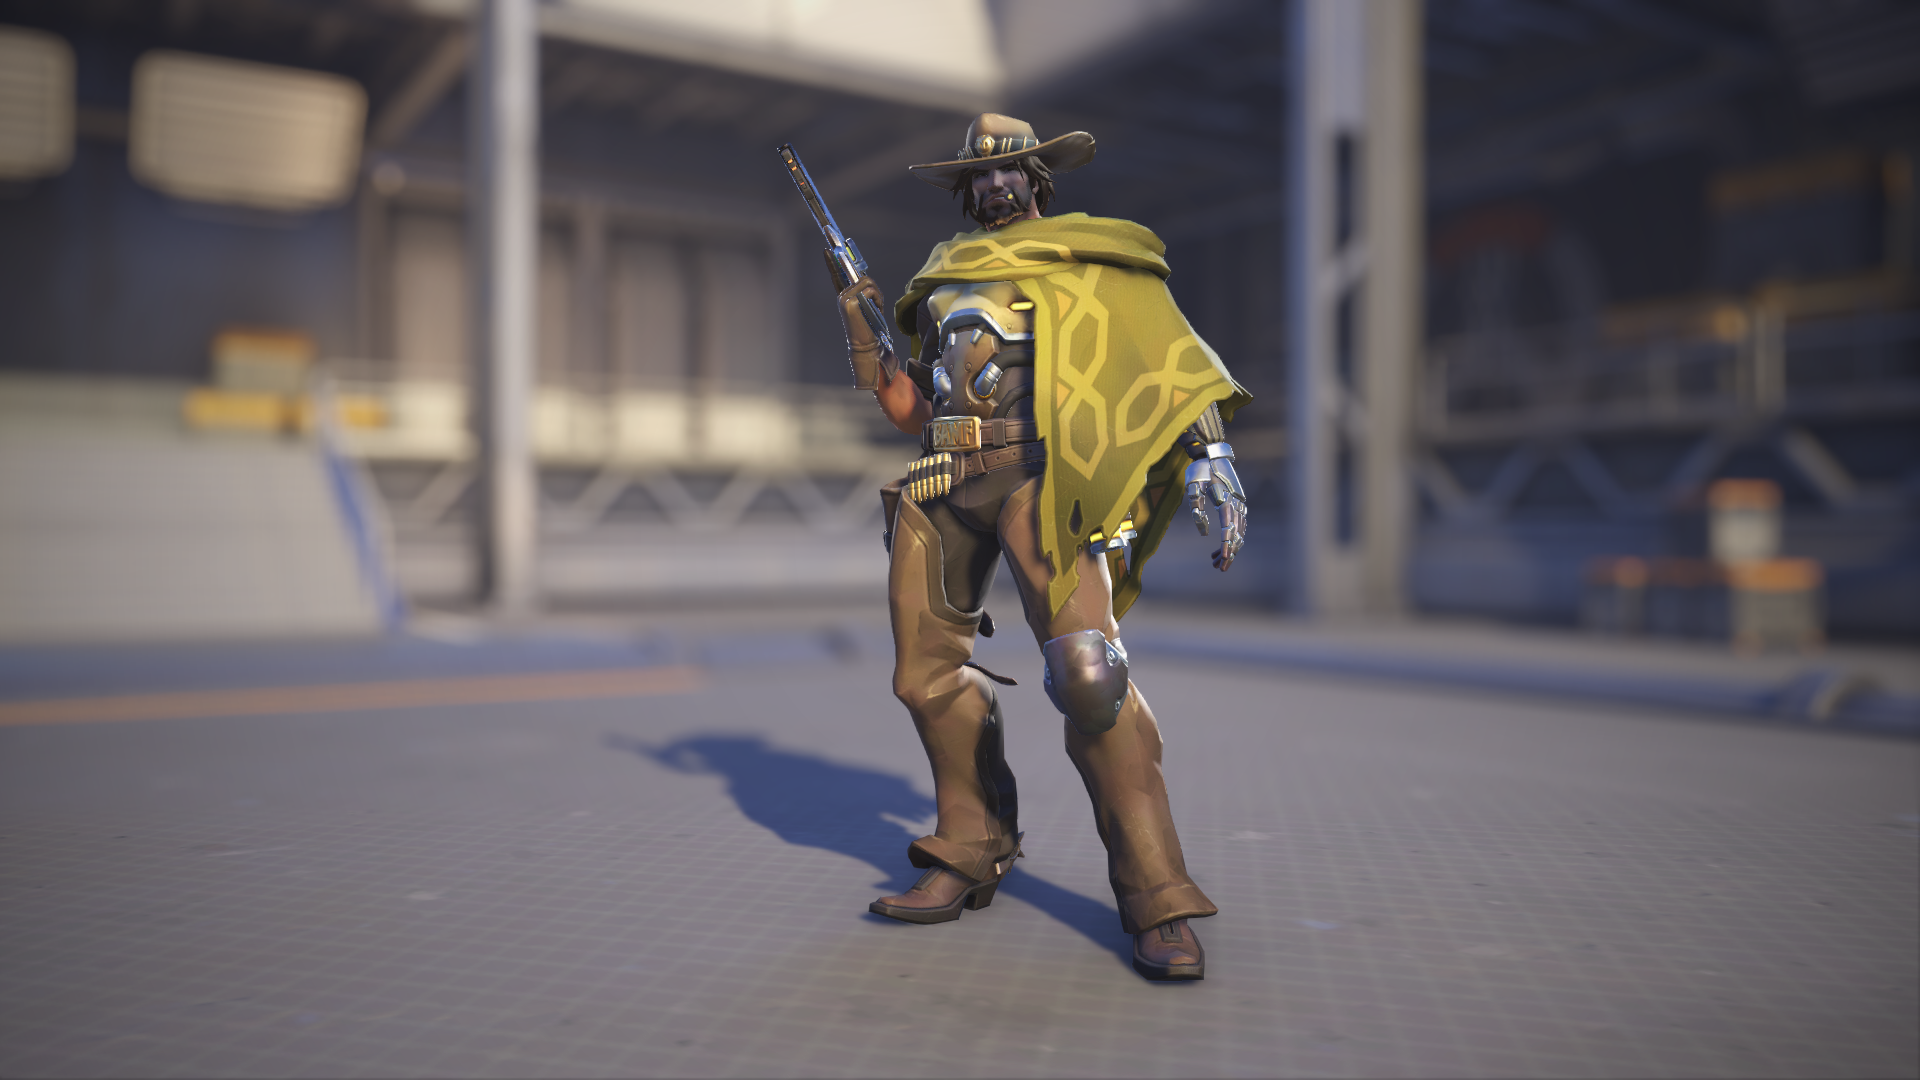 Cassidy models his Wheat skin in Overwatch 2.